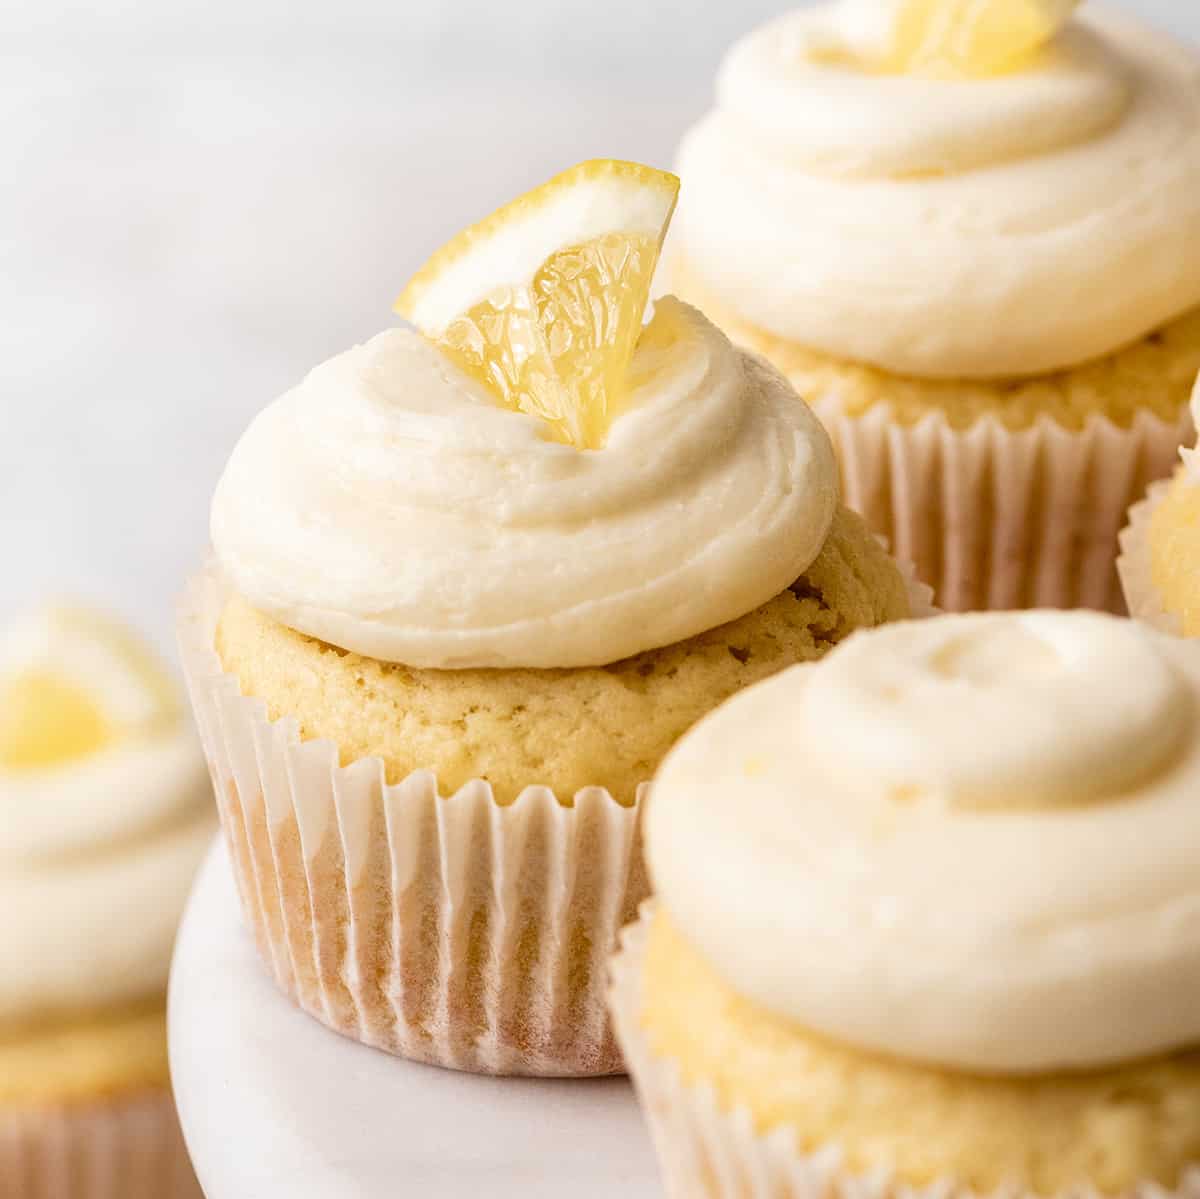 Lemon Buttercream Frosting piped on top of cupcakes